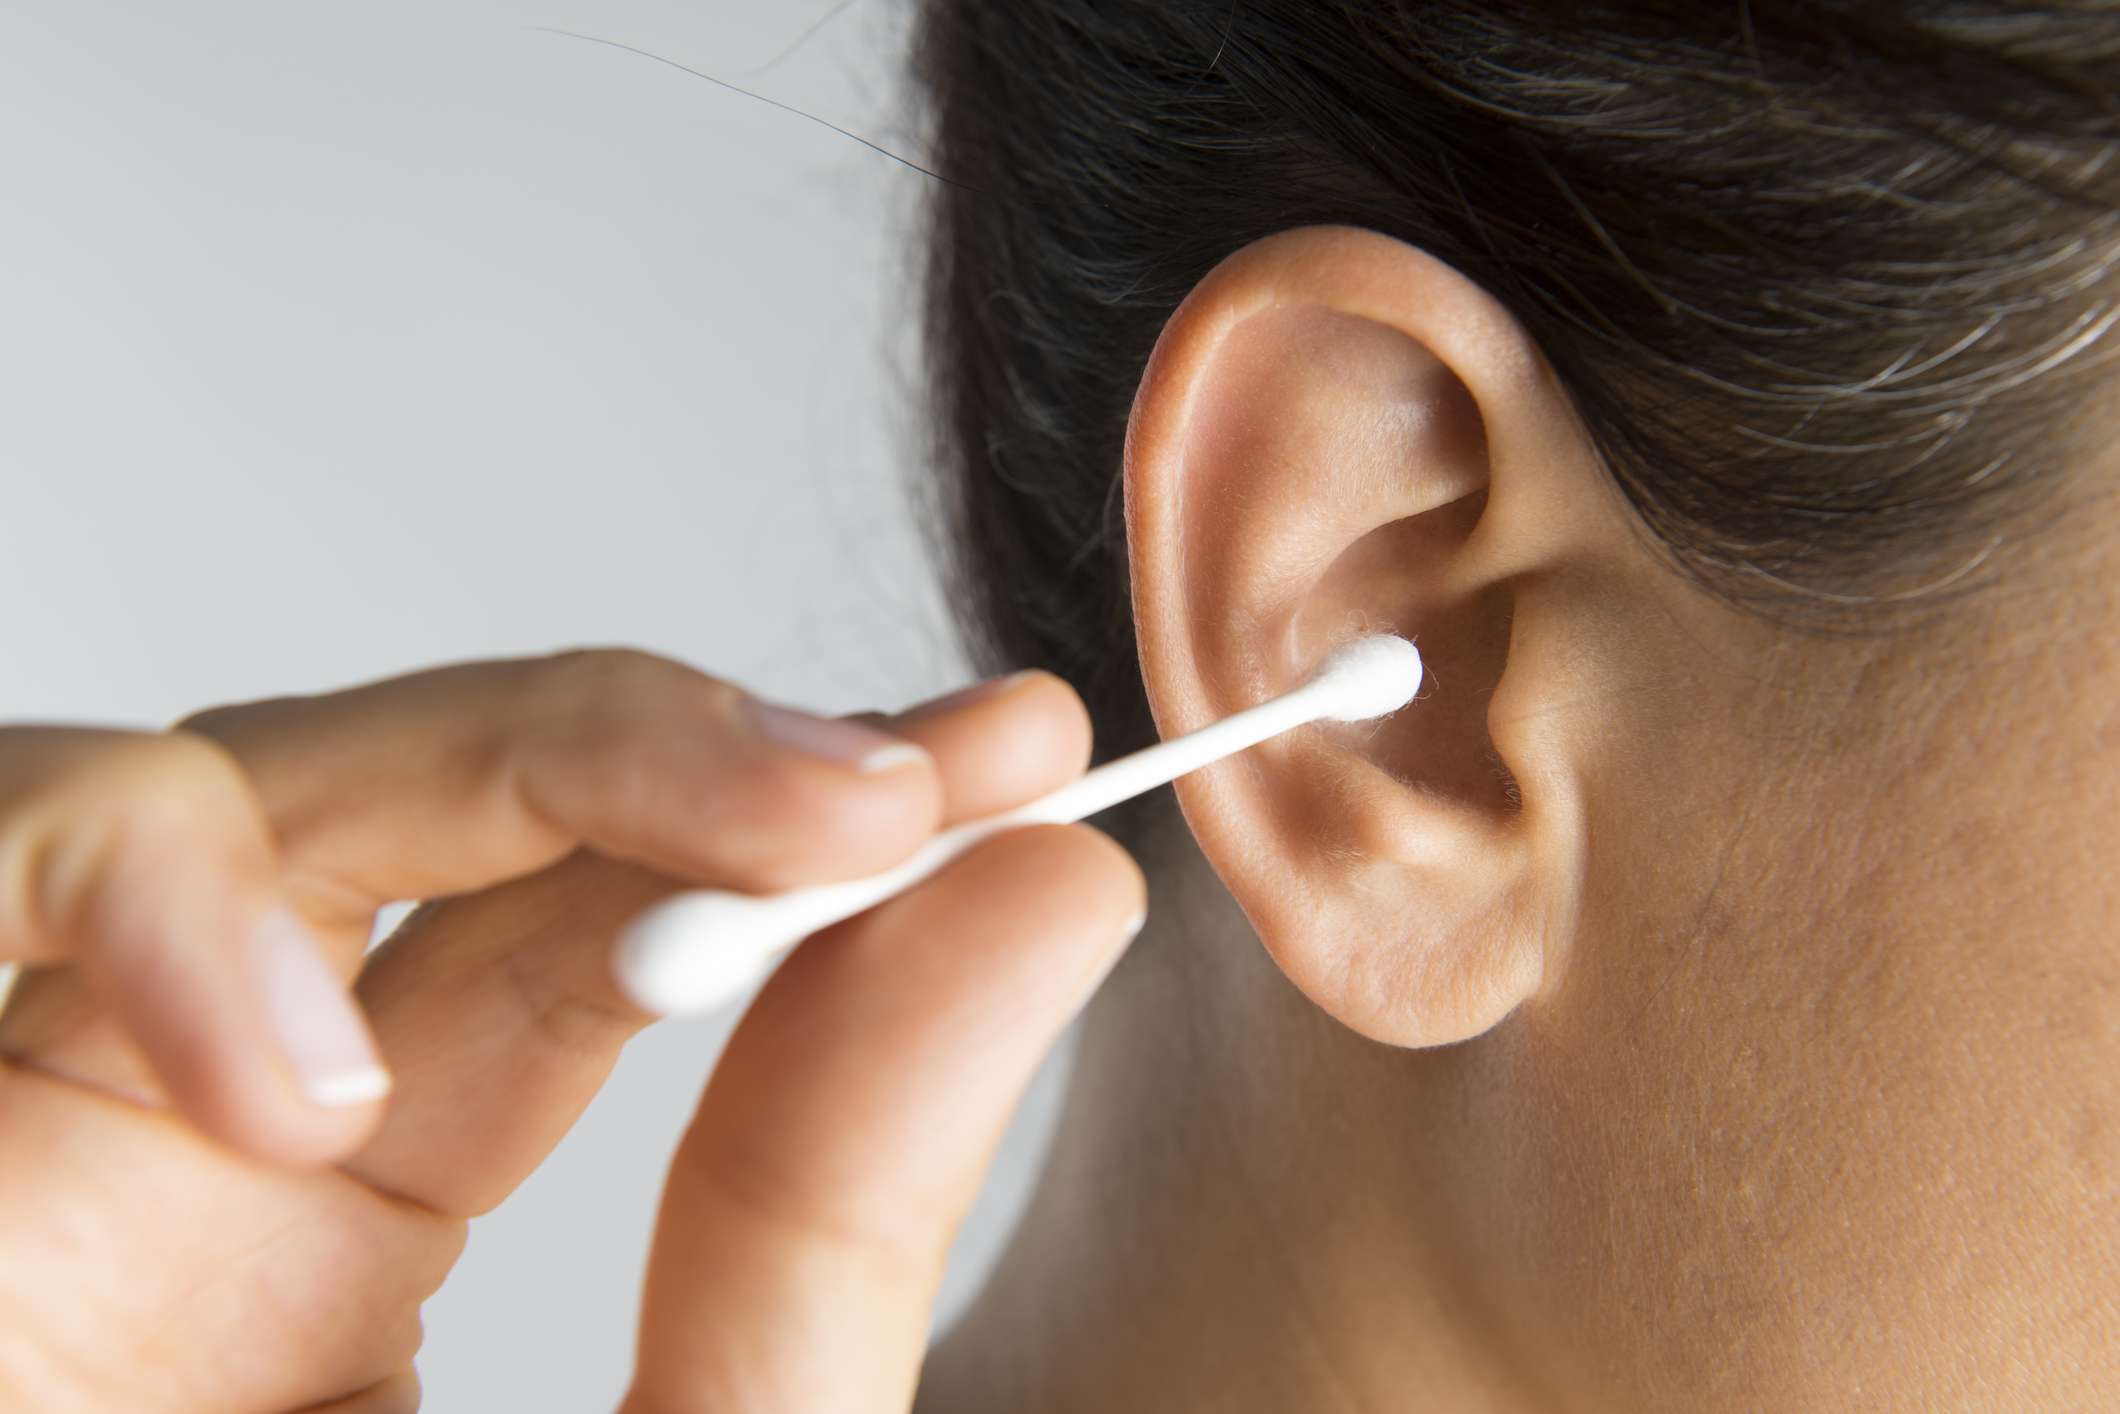 How To Properly Clean Your Ears After Piercing